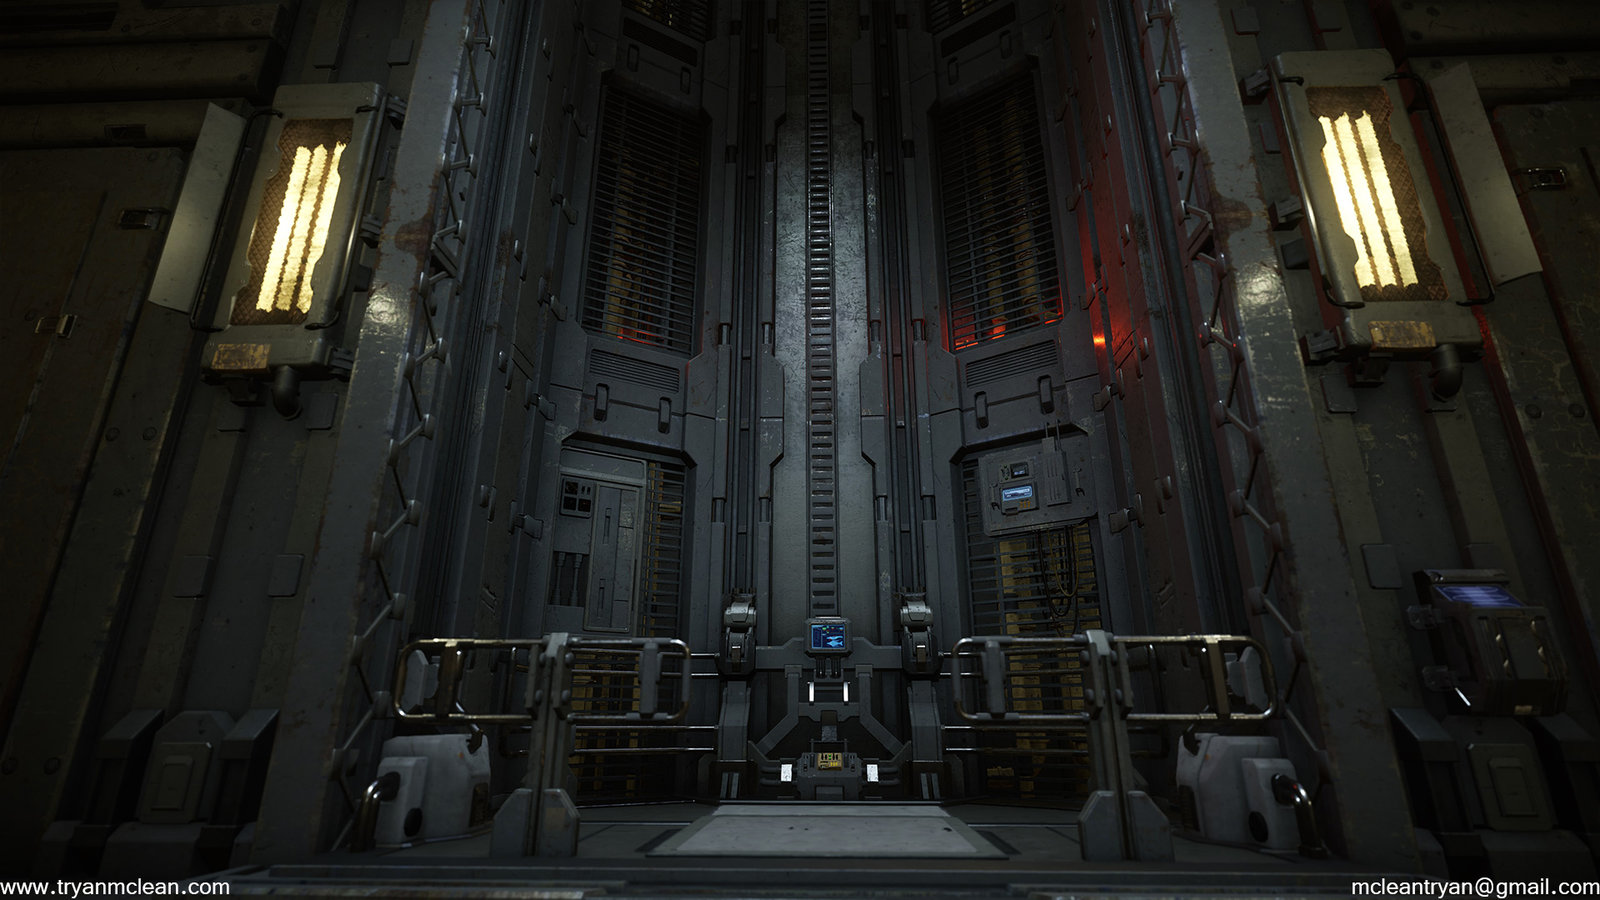 Star Citizen Hangar Control Area. Modelling done by myself. Texture blending done by myself. Textures, Materials created by others on team.